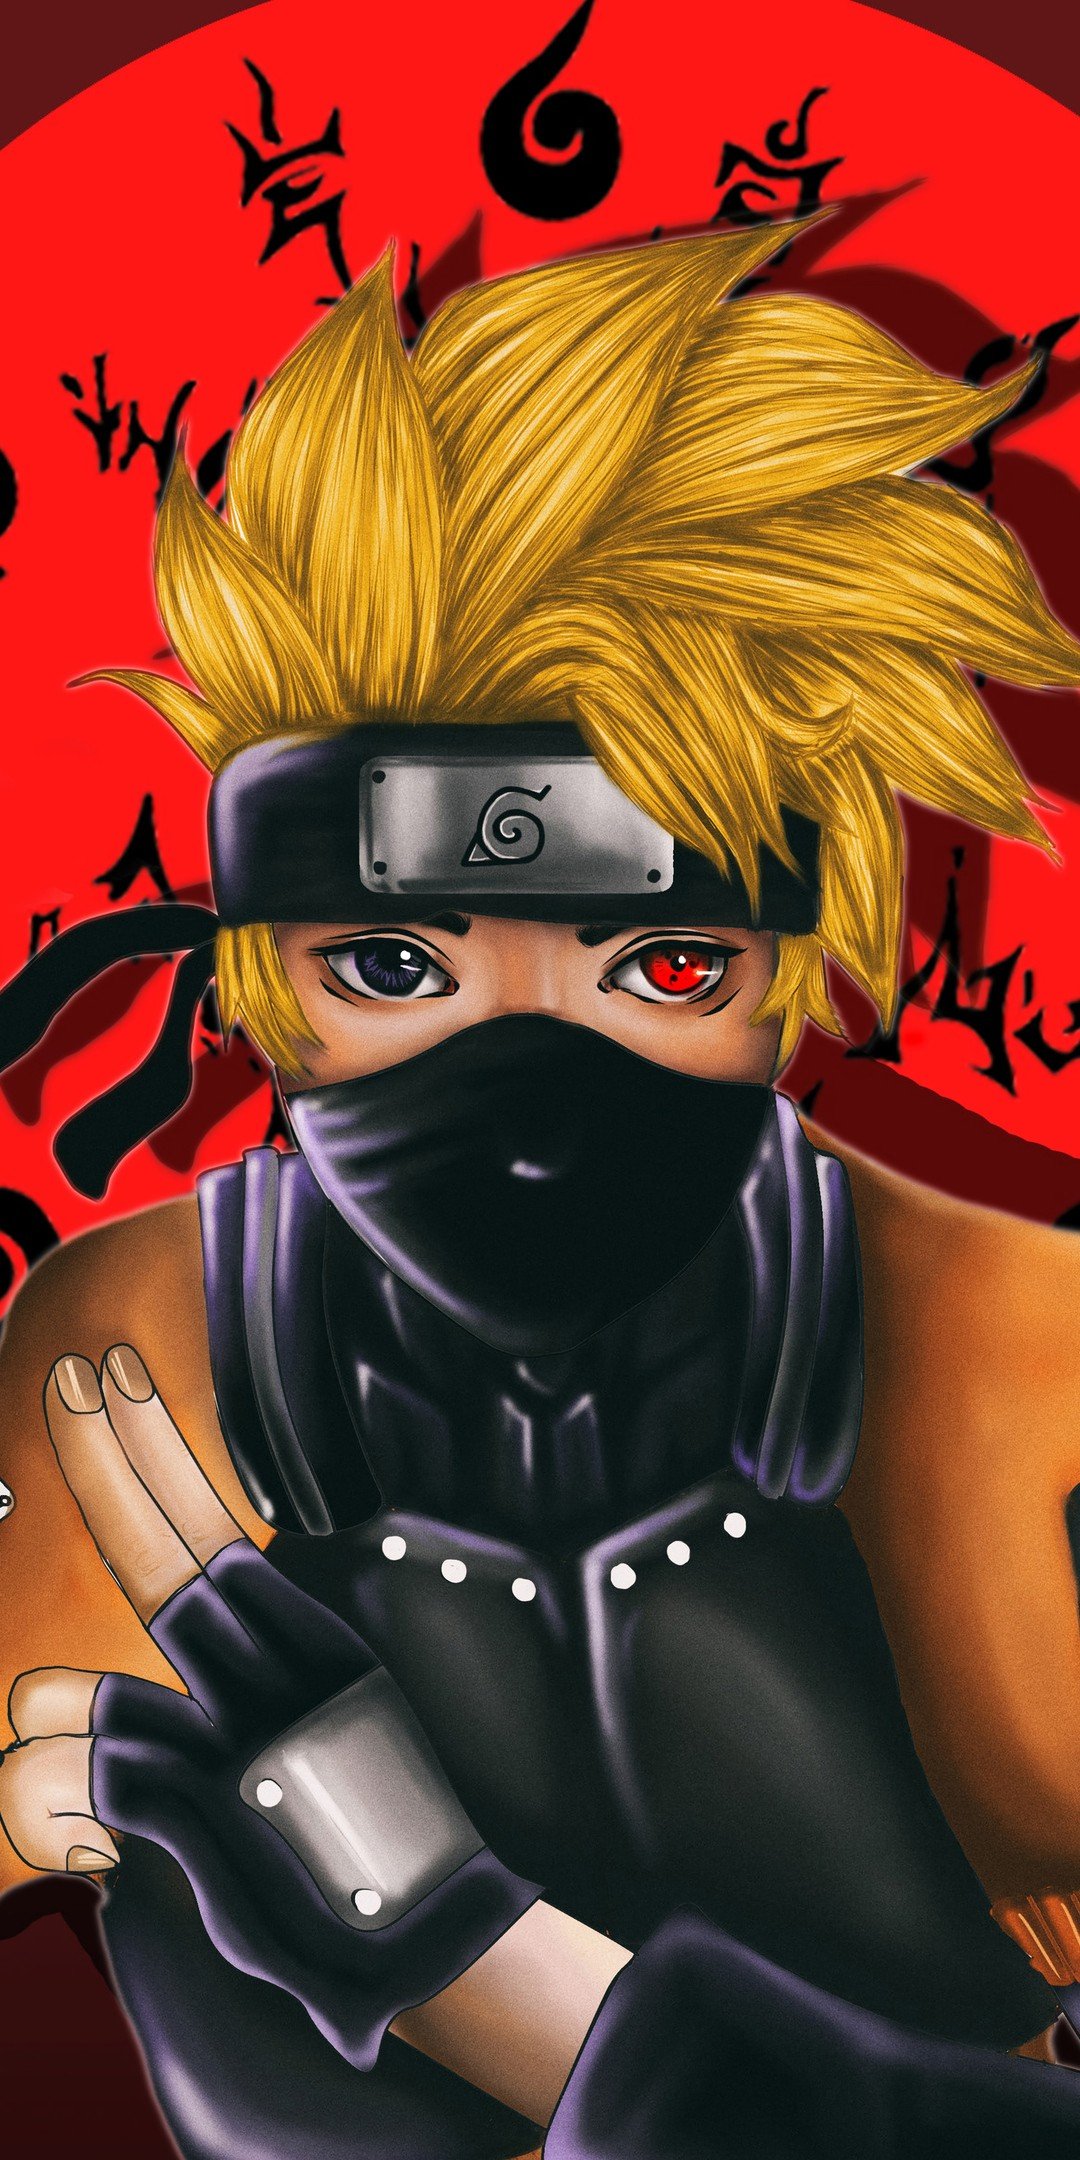 Anime Naruto Cool Wallpapers - Wallpaper Cave